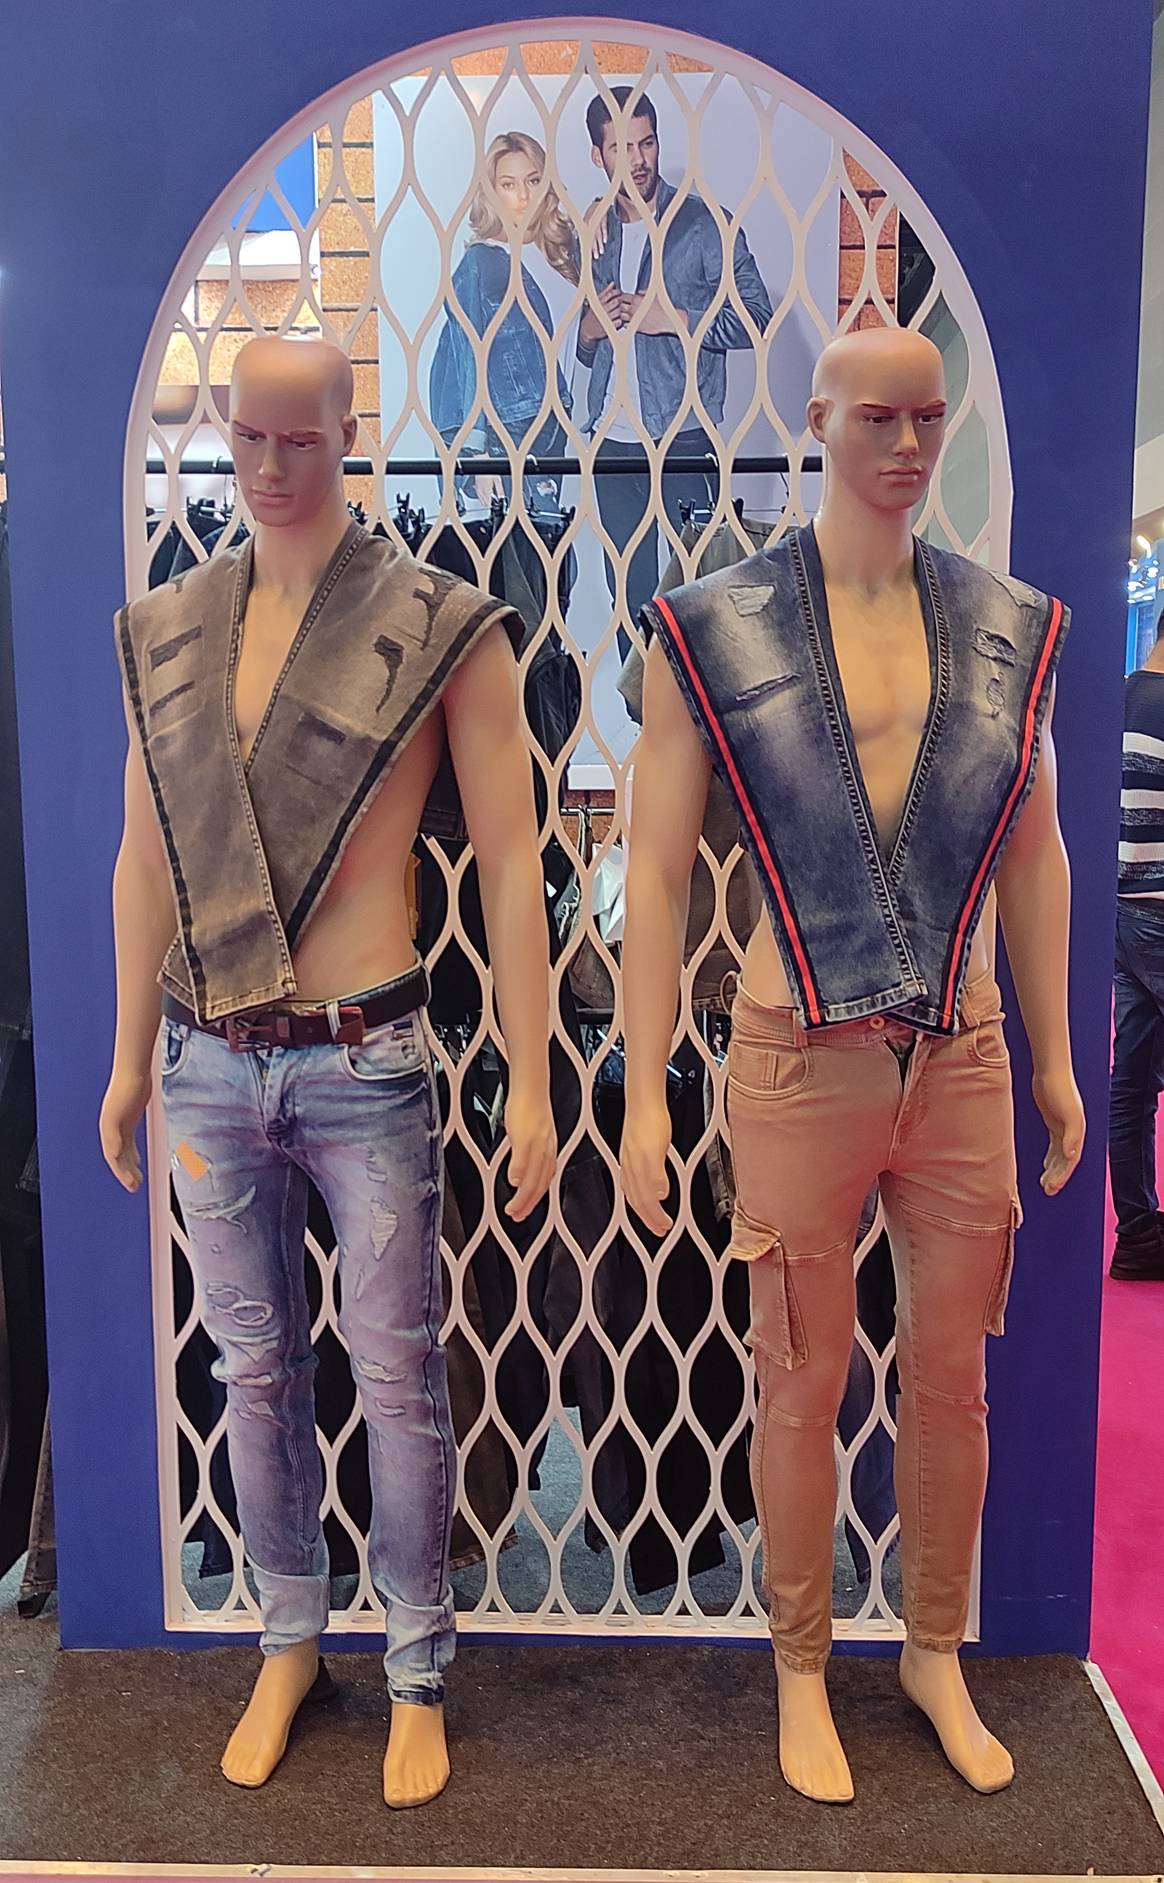 These two mannequins were showing a rather stern expression.